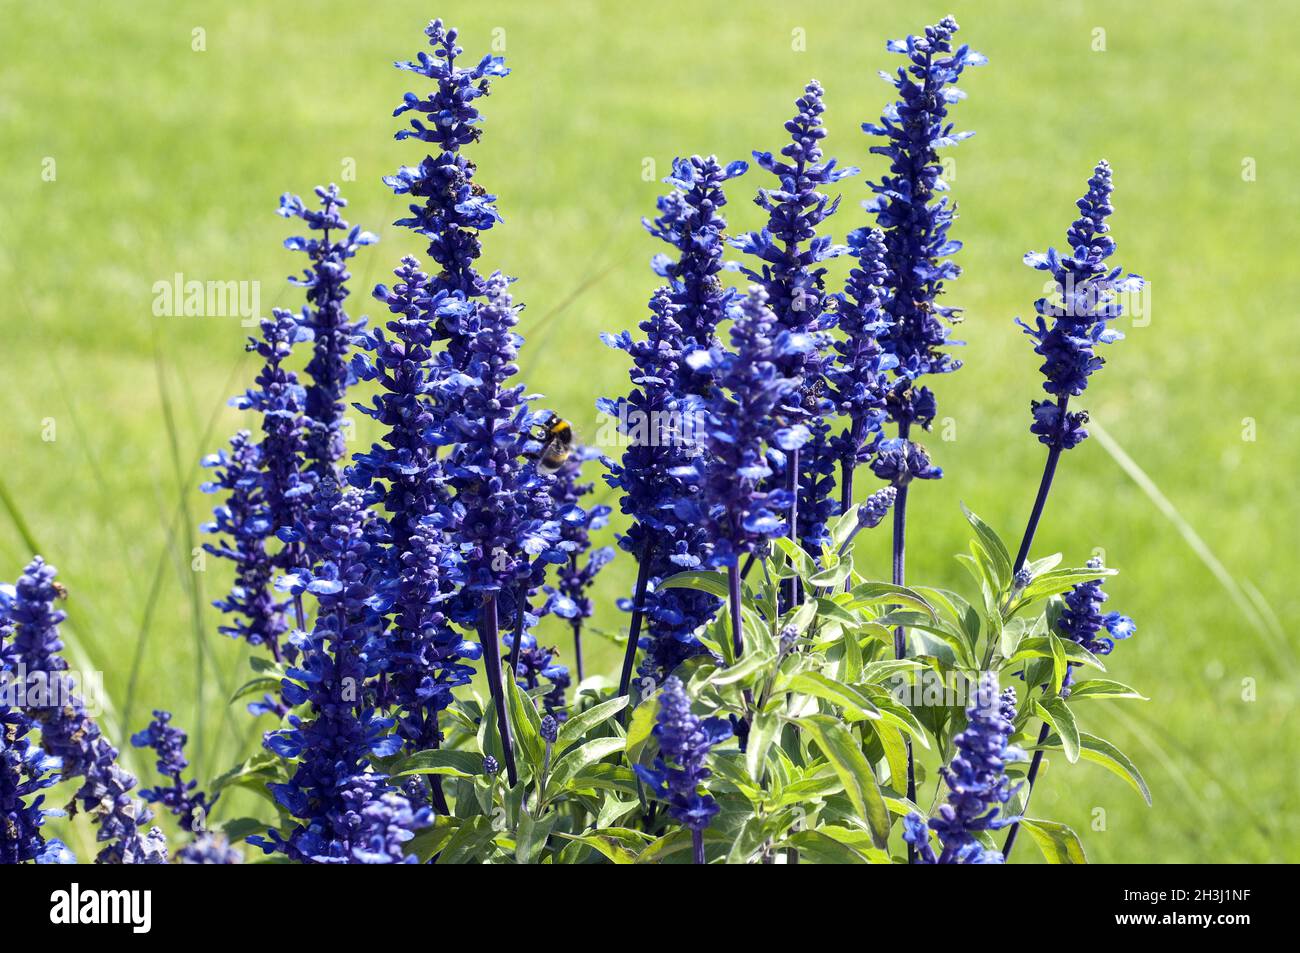 Salvia Farinacea High Resolution Stock Photography and Images - Alamy